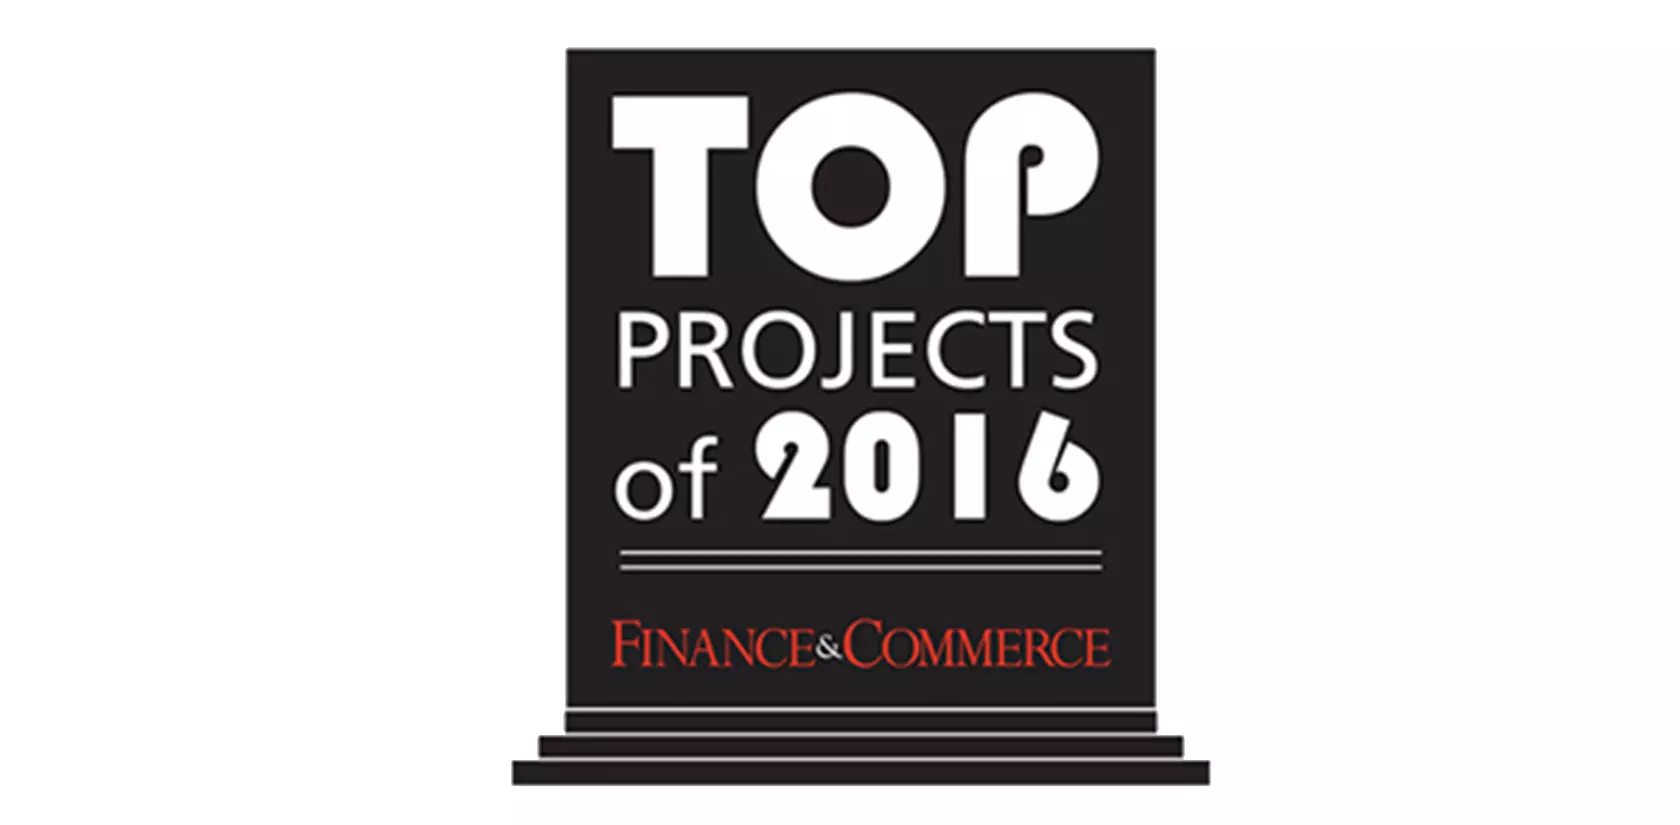 Top projects of 2016 award